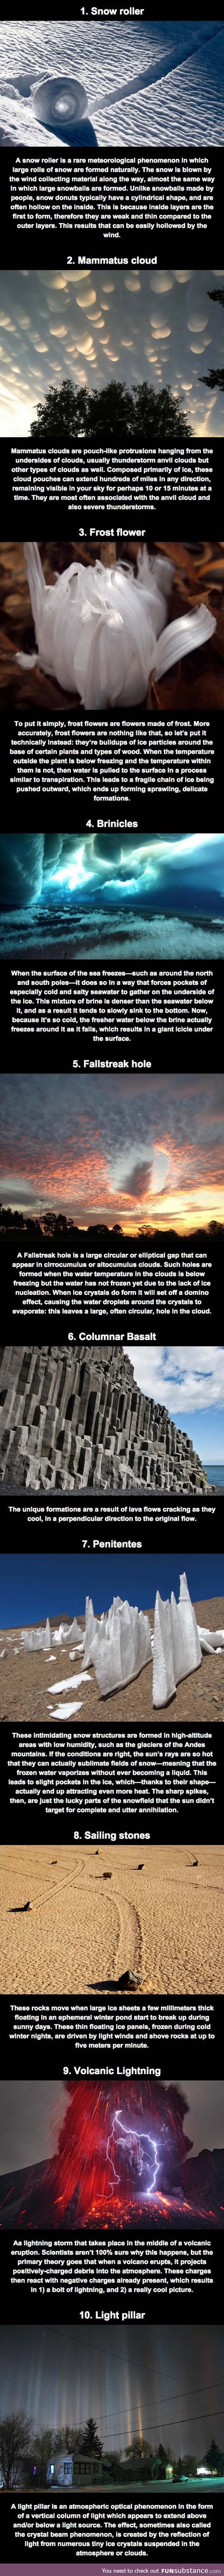 Some ridiculously cool natural phenomena